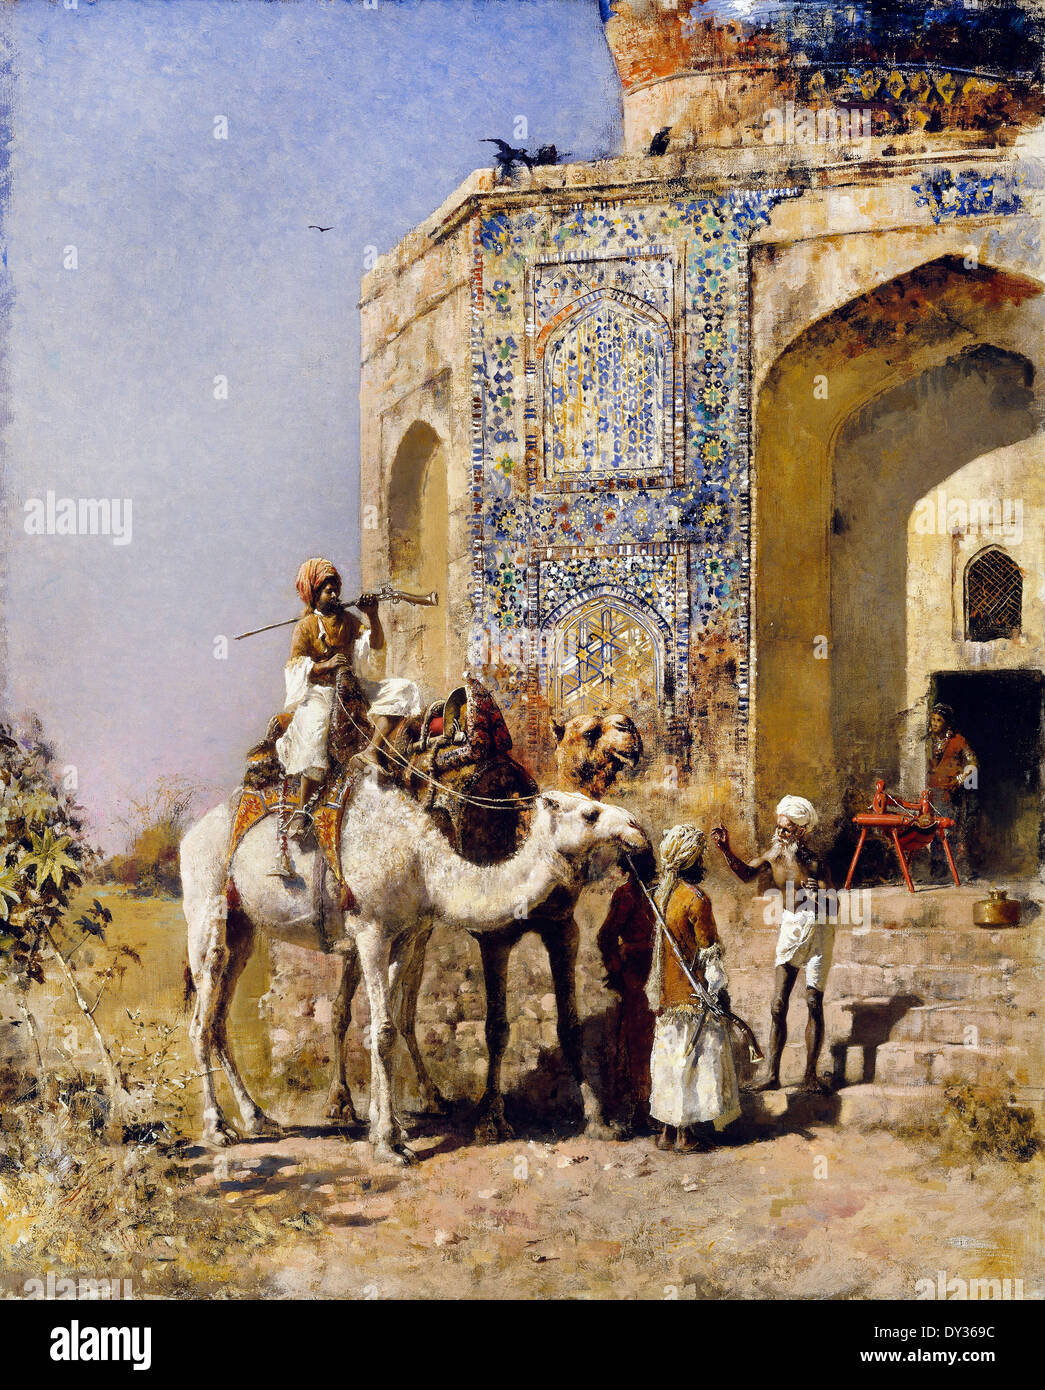 Edwin Lord Weeks, The Old Blue-Tiled Mosque Outside of Delhi, India. Circa 1885. Oil on canvas. Brooklyn Museum, New York City Stock Photo